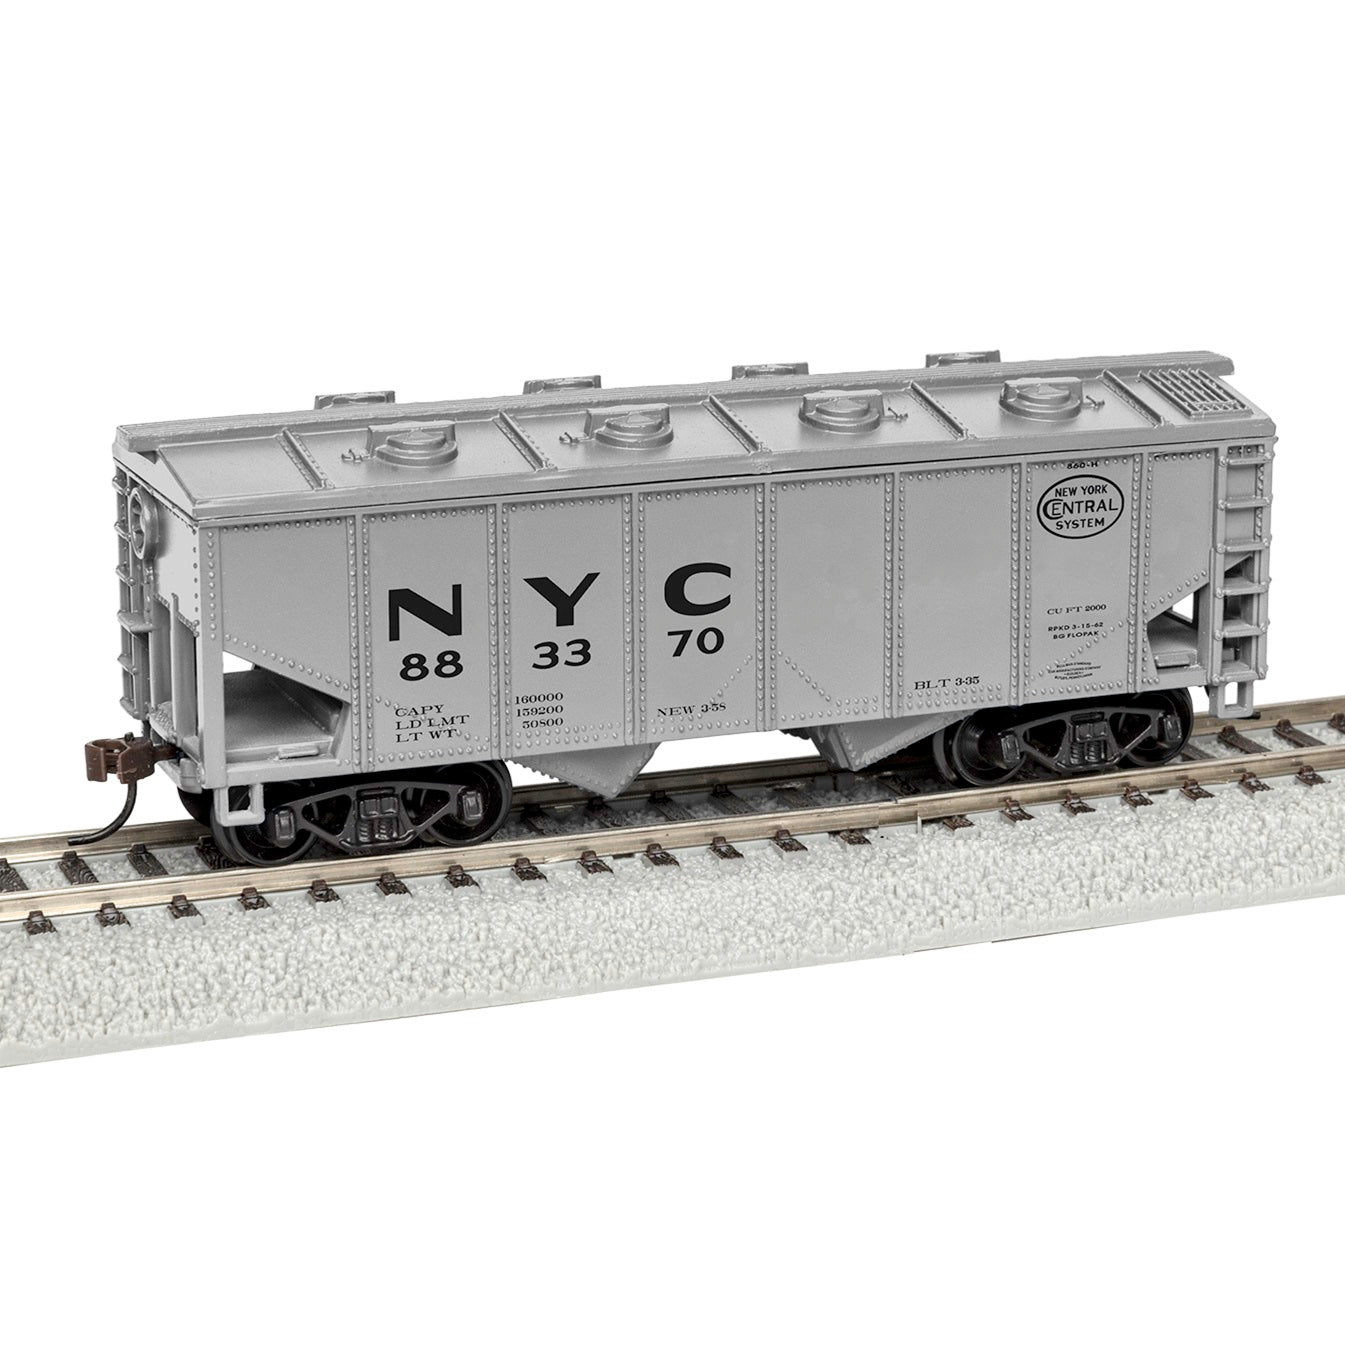 Lionel New York Central Covered Hopper #883370, HO Scale